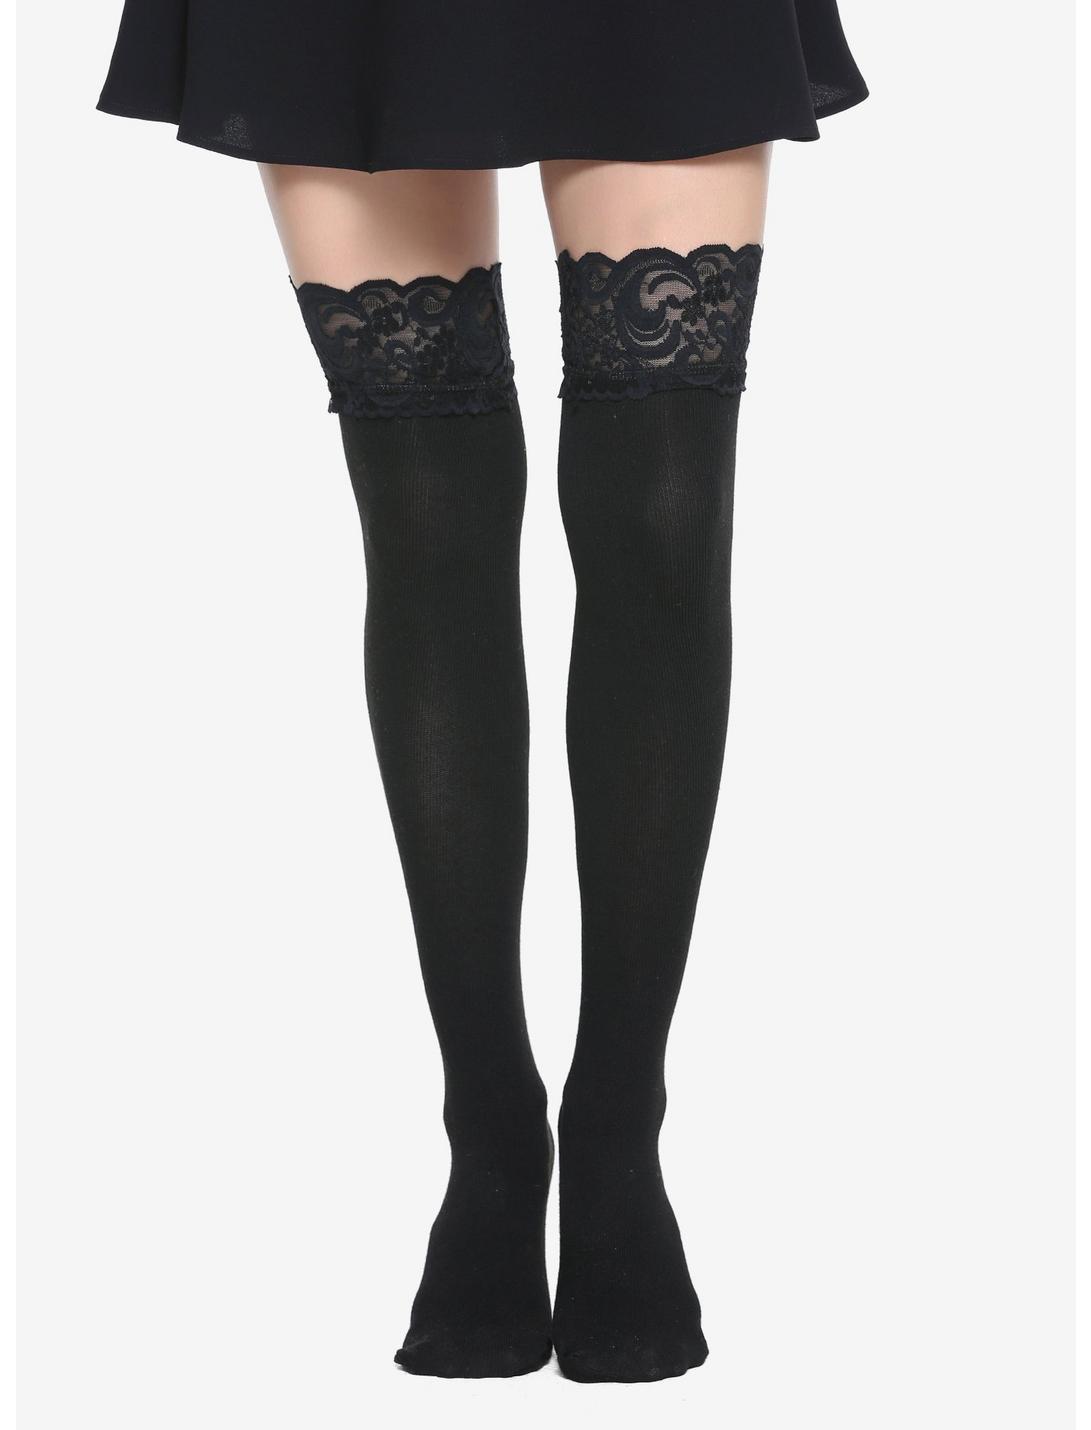 Blackheart Wide Lace Band Over-The-Knee Socks, , hi-res